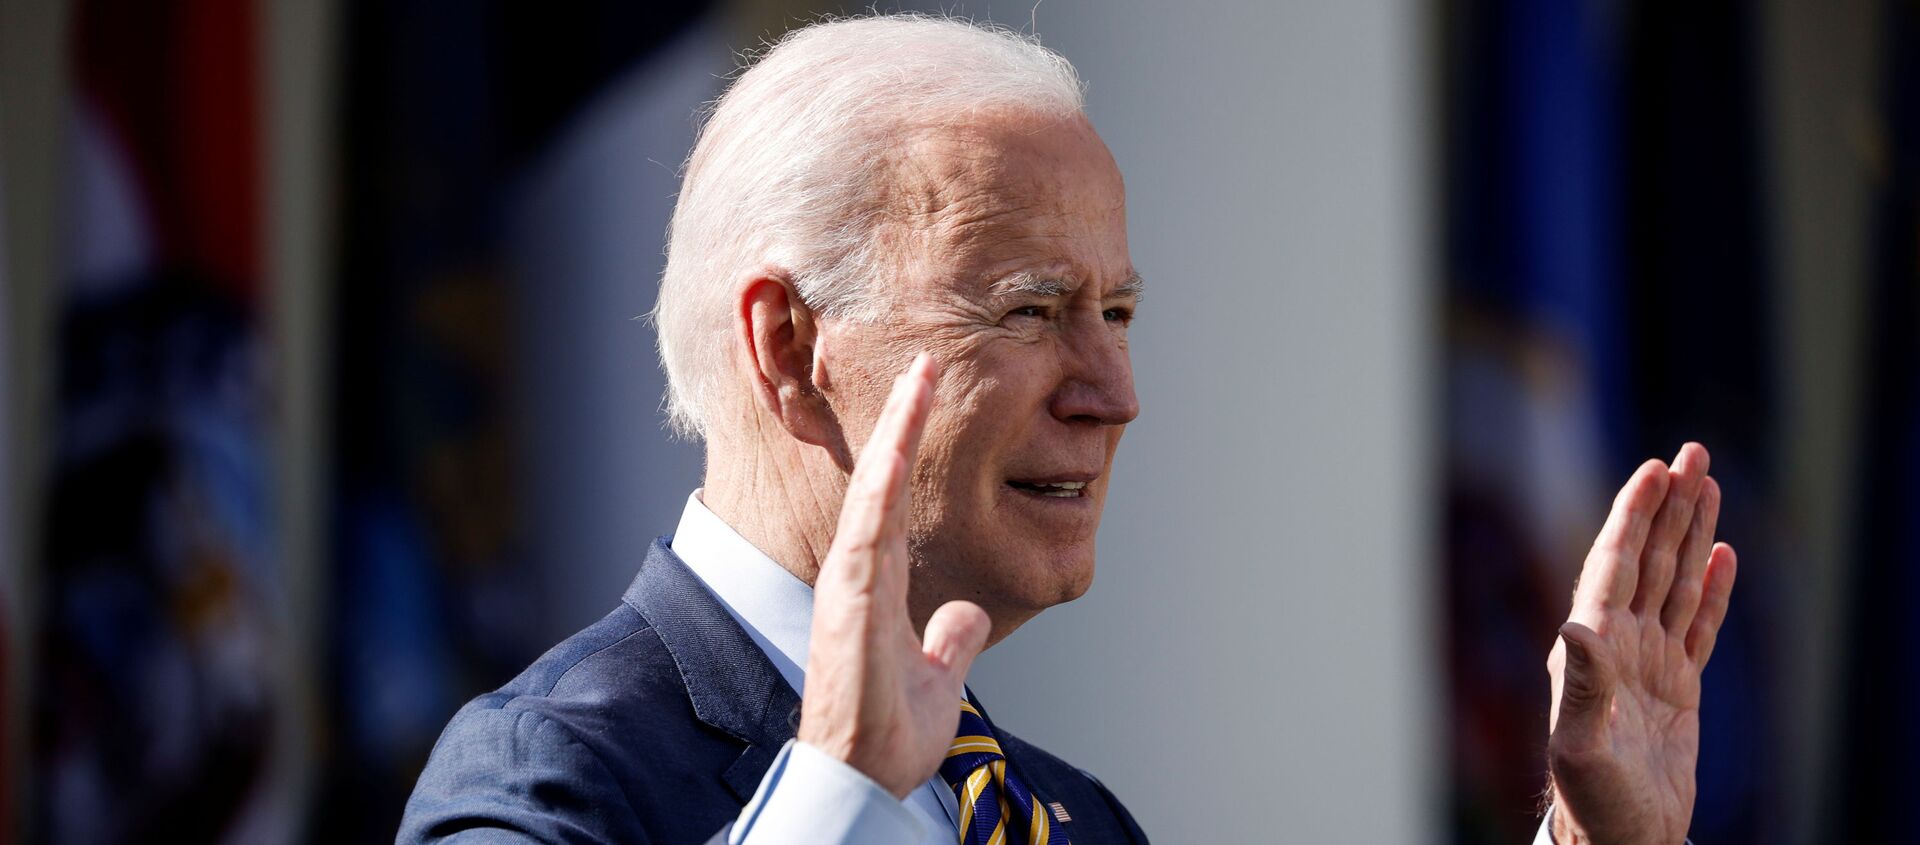 U.S. President Joe Biden speaks about the $1.9 trillion American Rescue Plan Act  during an event to celebrate the legislation in the Rose Garden at the White House in Washington, U.S., March 12, 2021 - Sputnik International, 1920, 13.03.2021